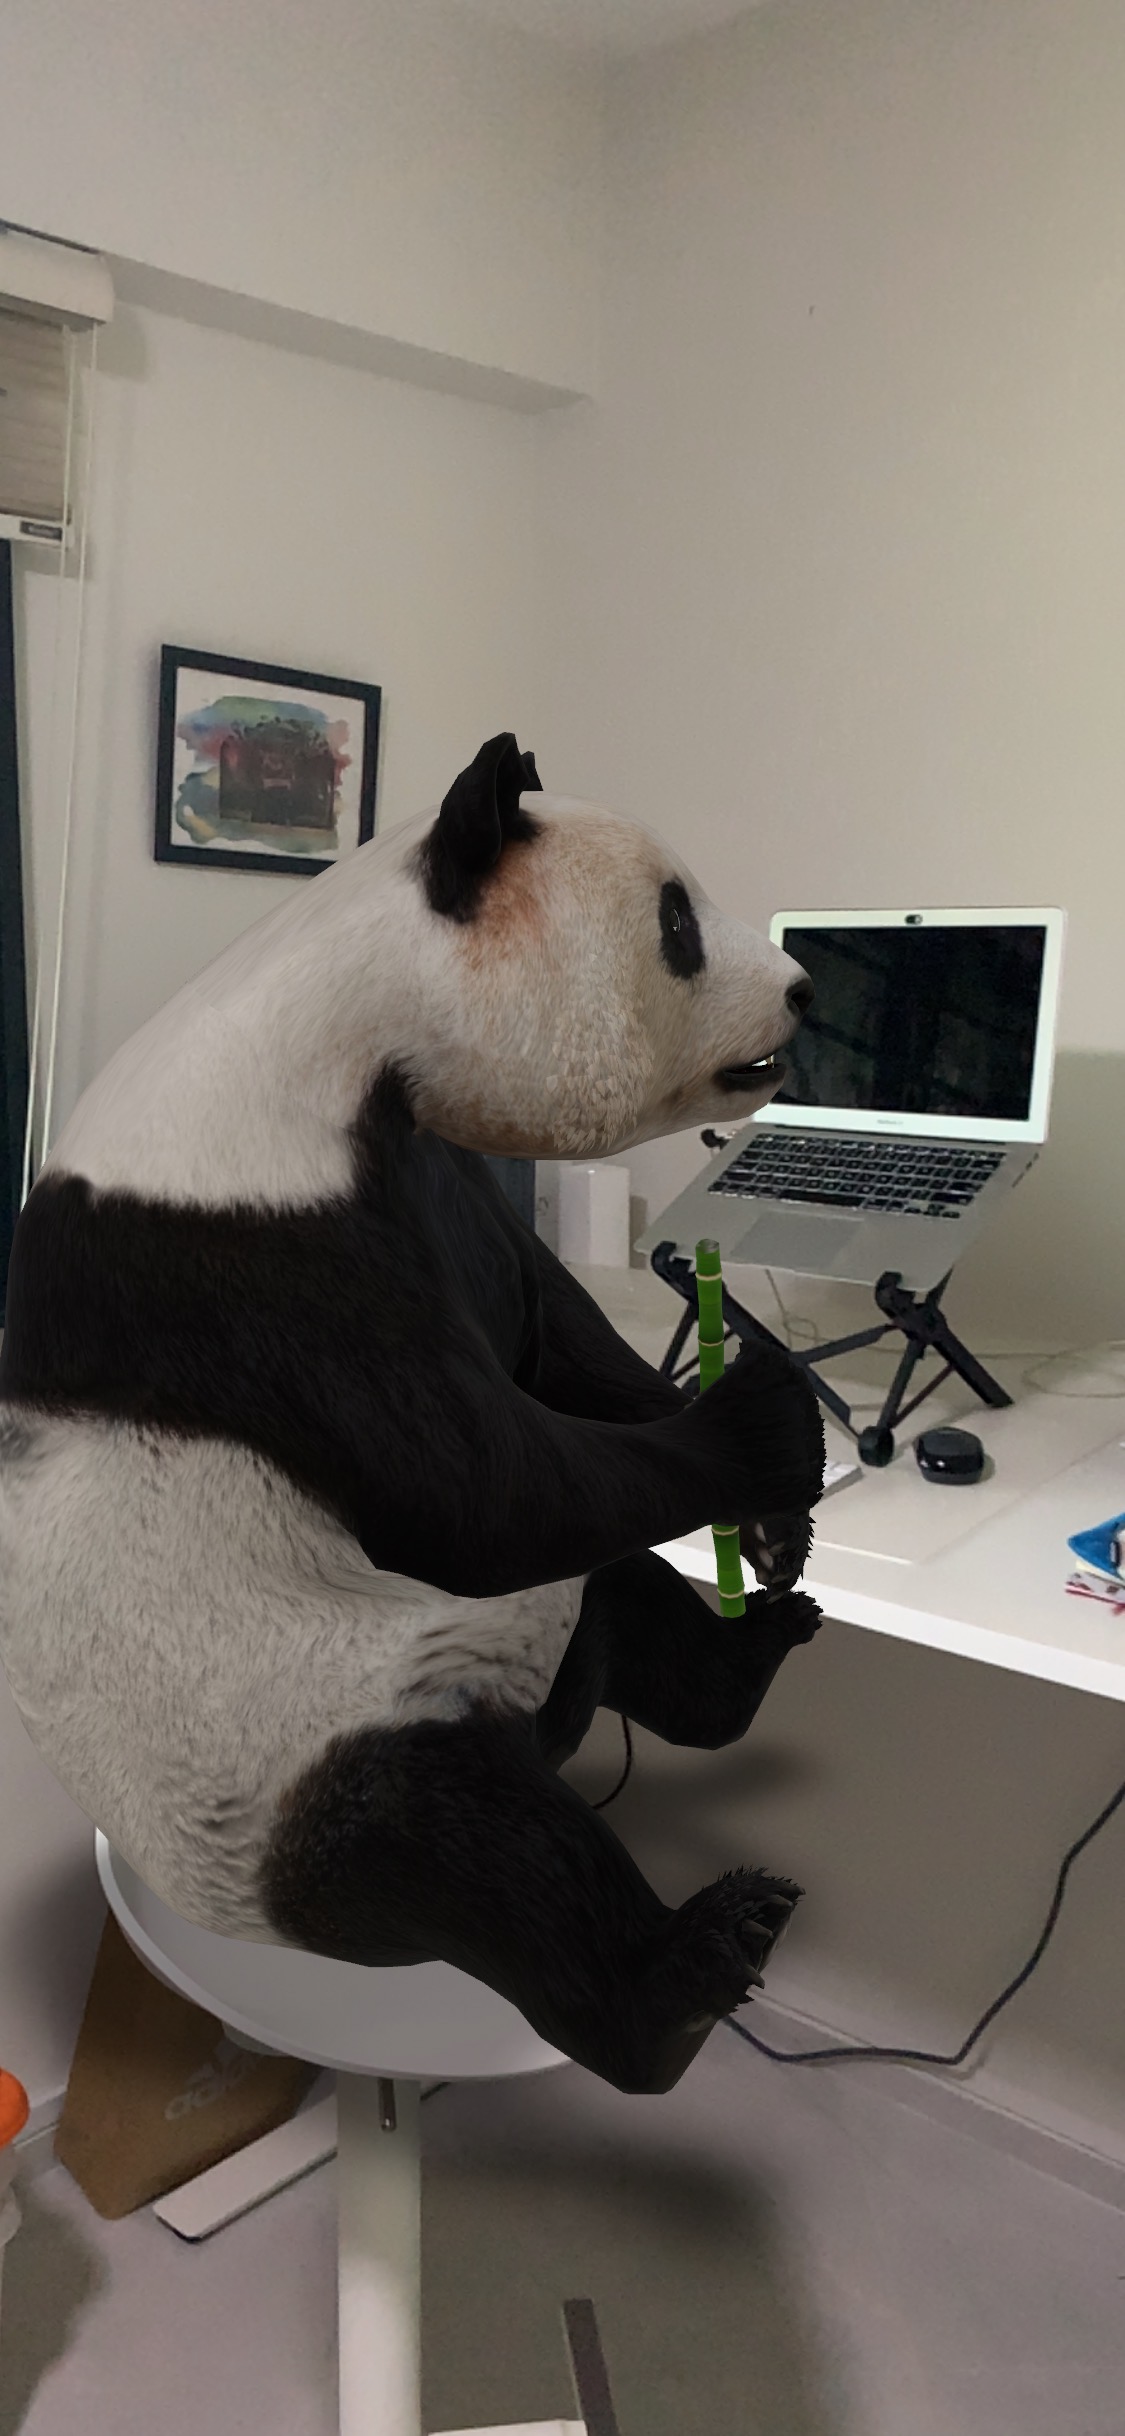 Keep yourself entertained at home with Google Chrome 3D AR Animals -   - News from Singapore, Asia and around the world